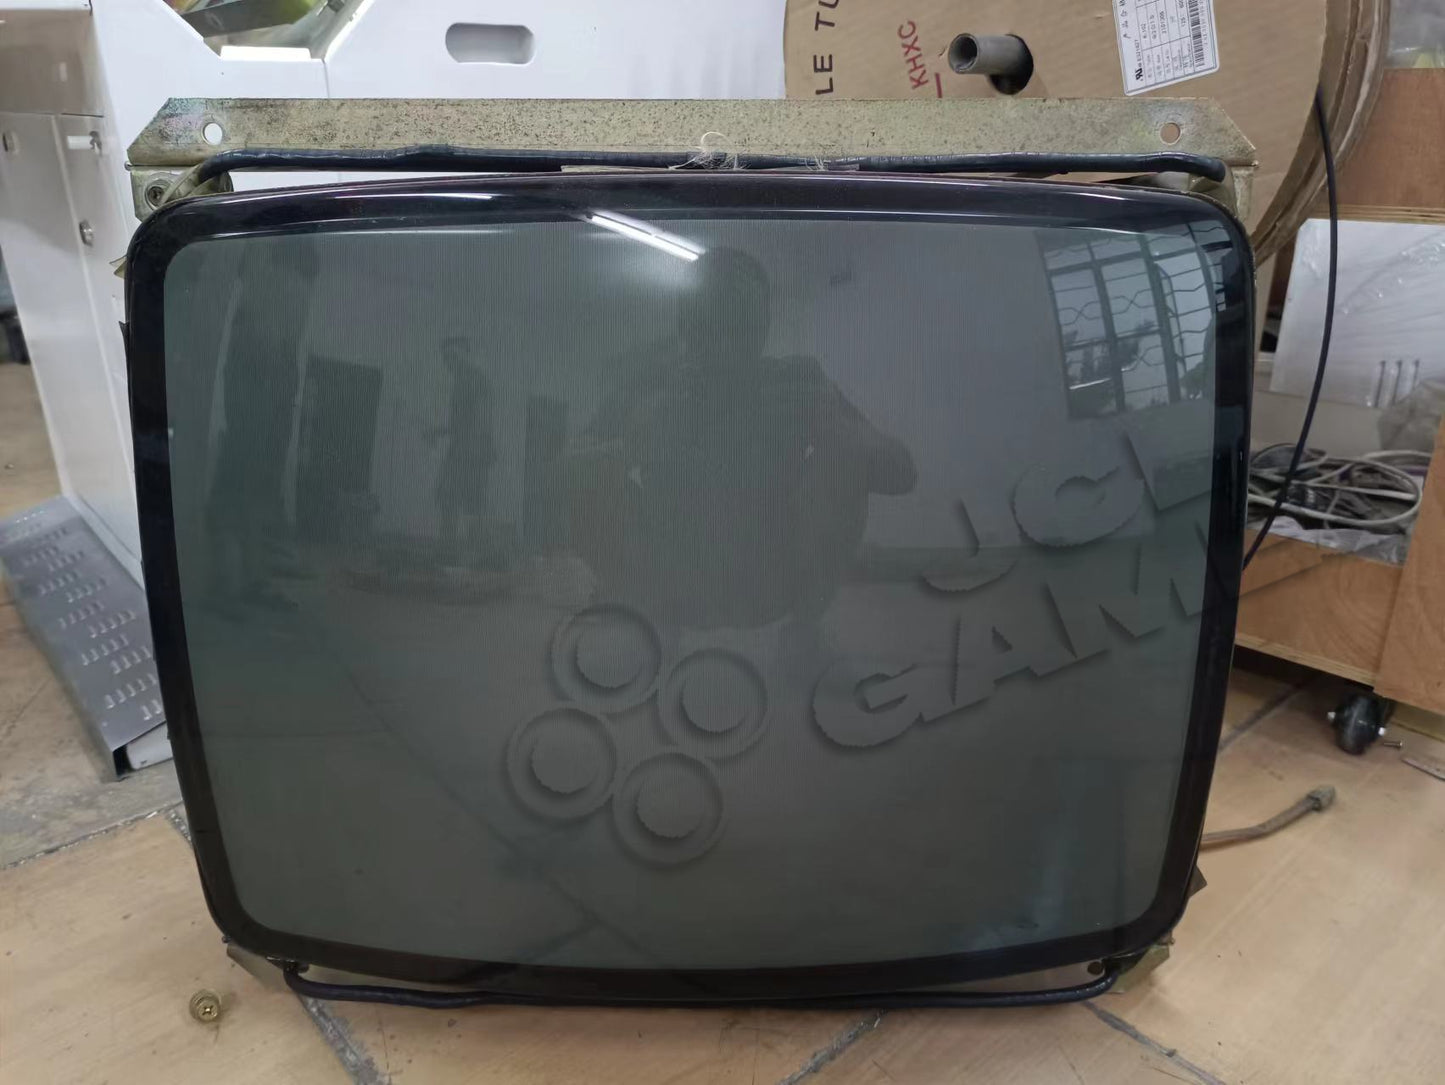 Toshiba 25" CRT with Chassis MS8 DUAL jclgames 001